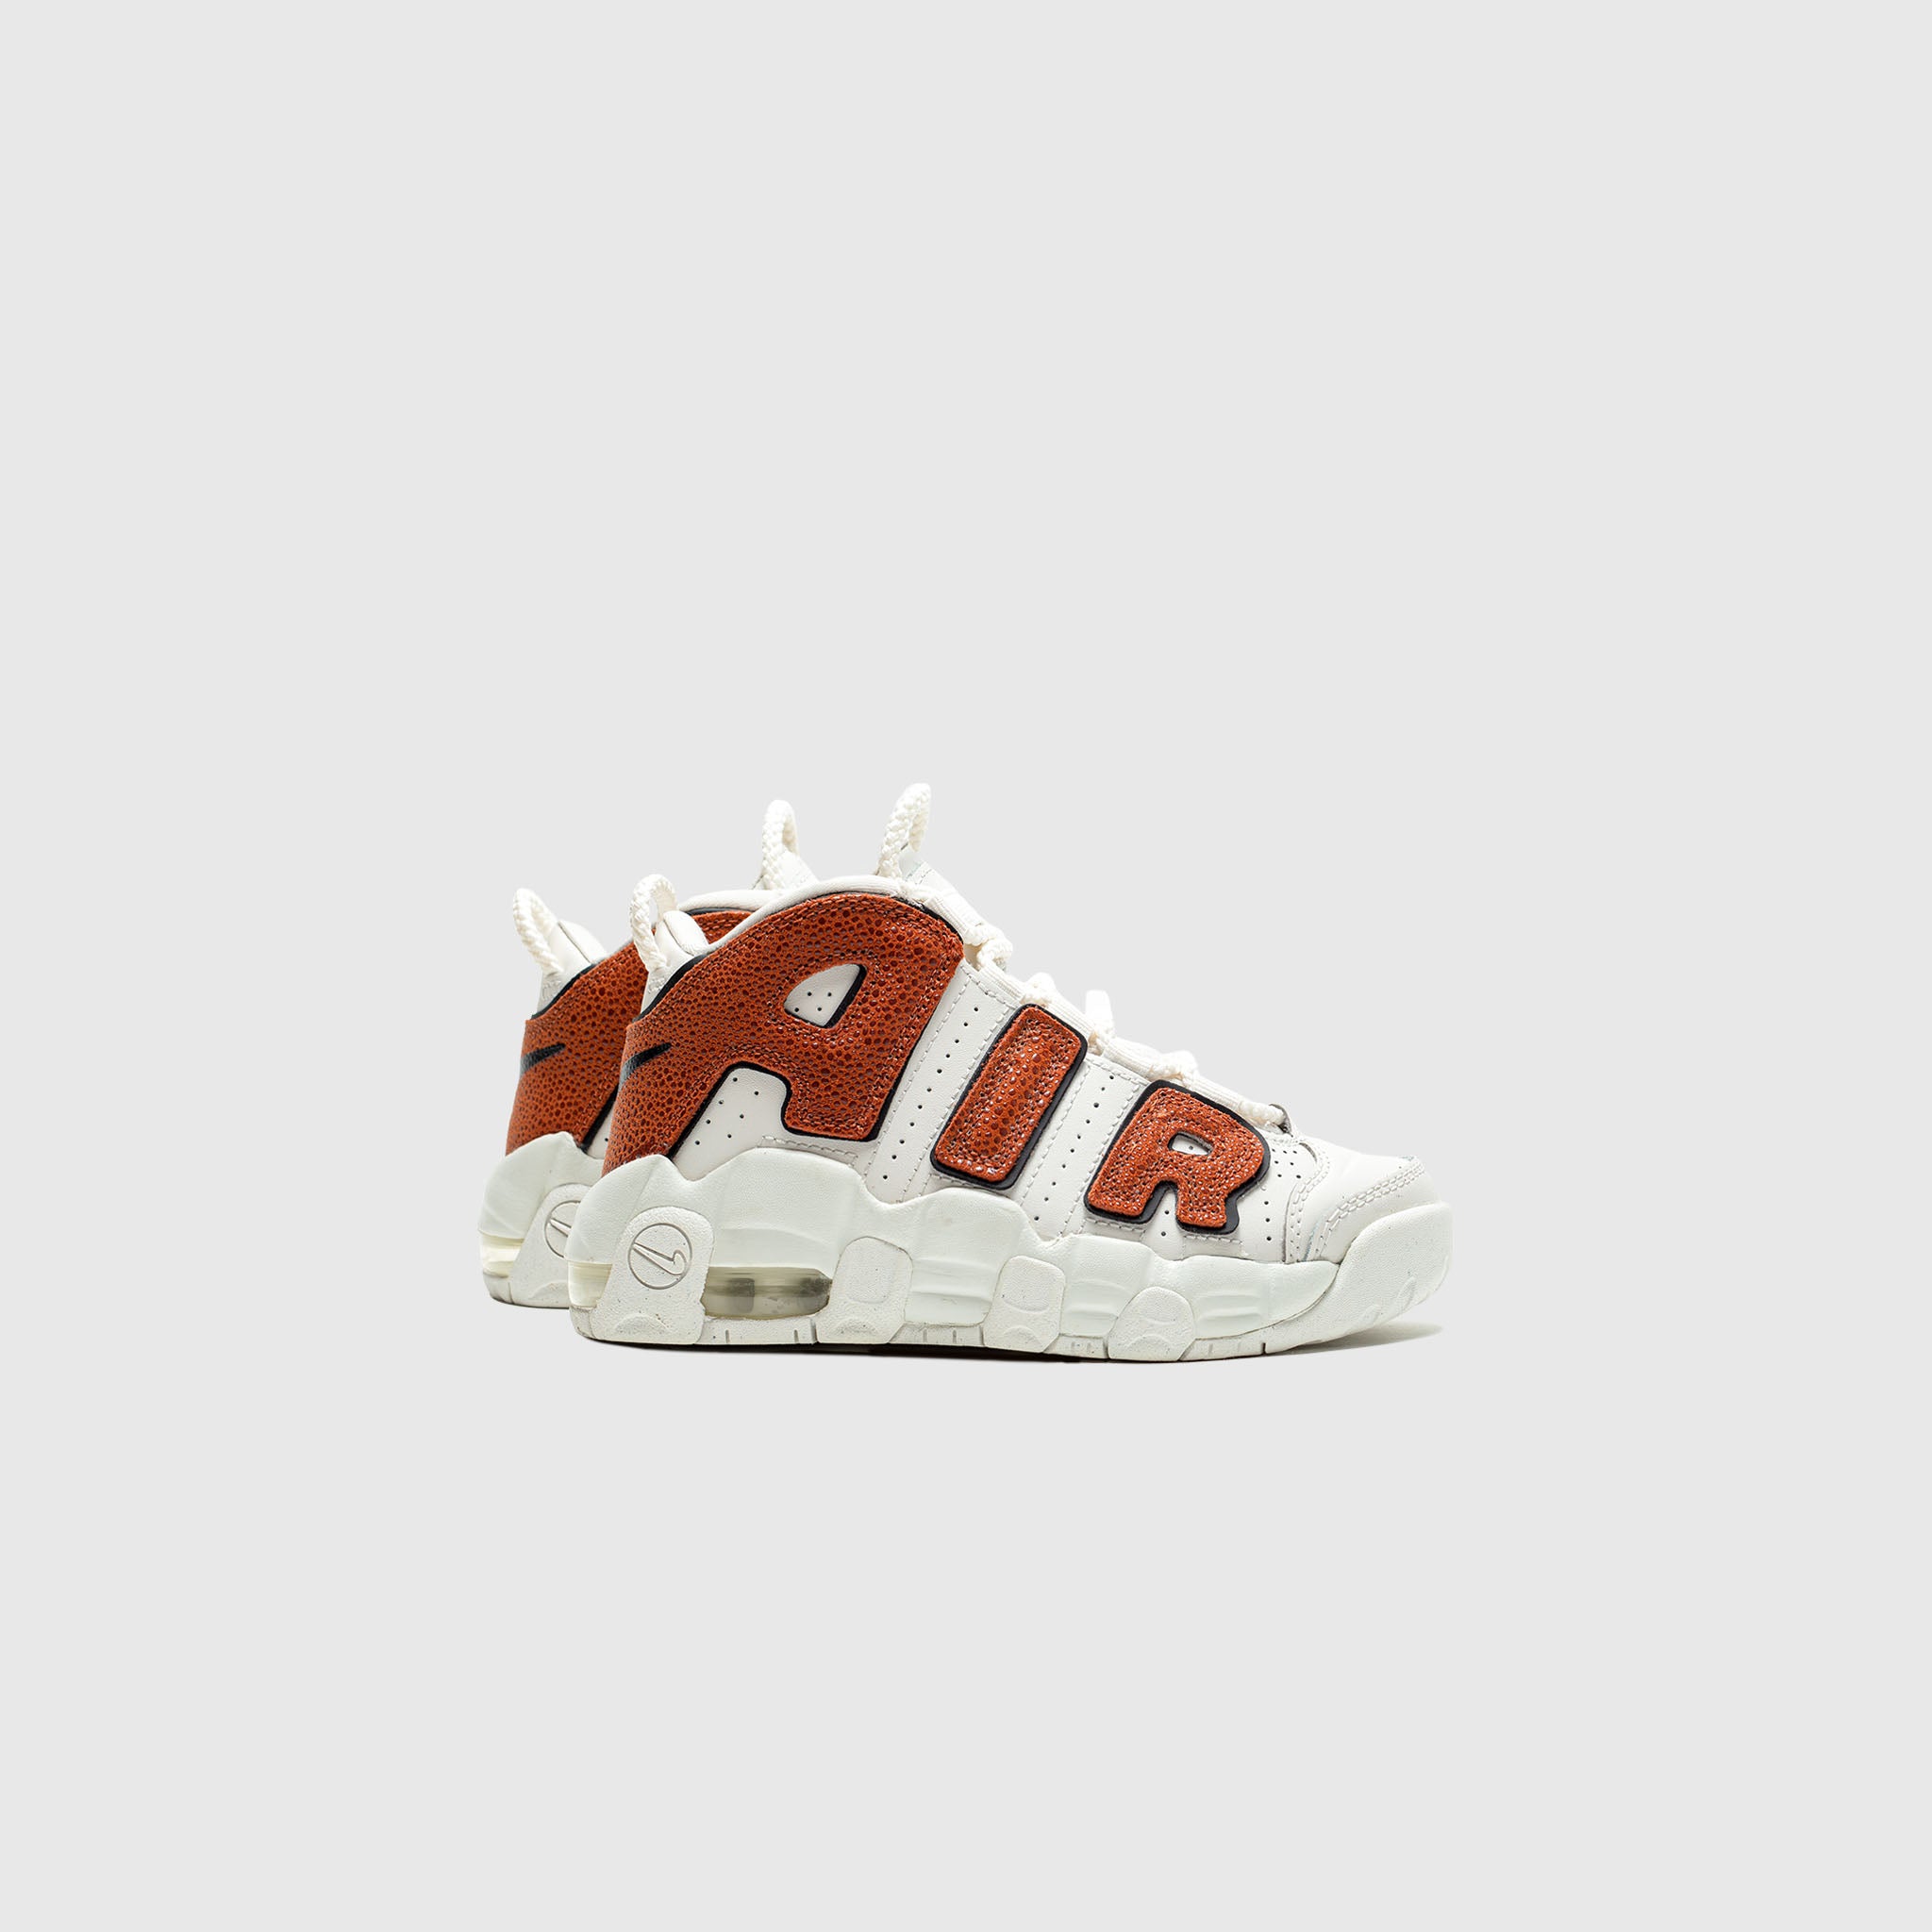 AIR MORE UPTEMPO '96 (PS) "BASKETBALL LEATHER"